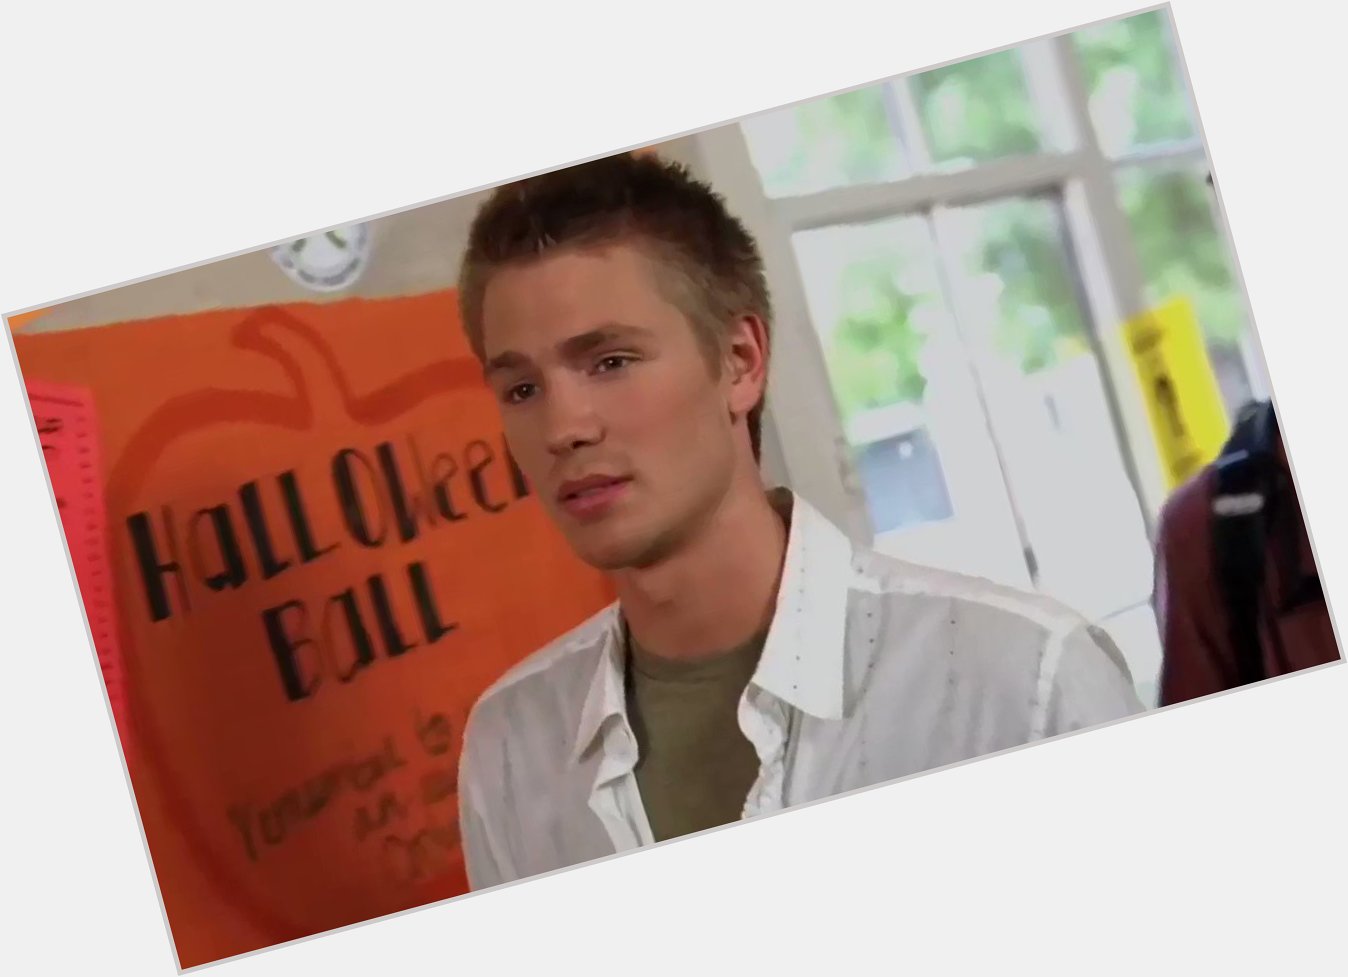 Happy belated birthday to the legend that is Chad Michael Murray 